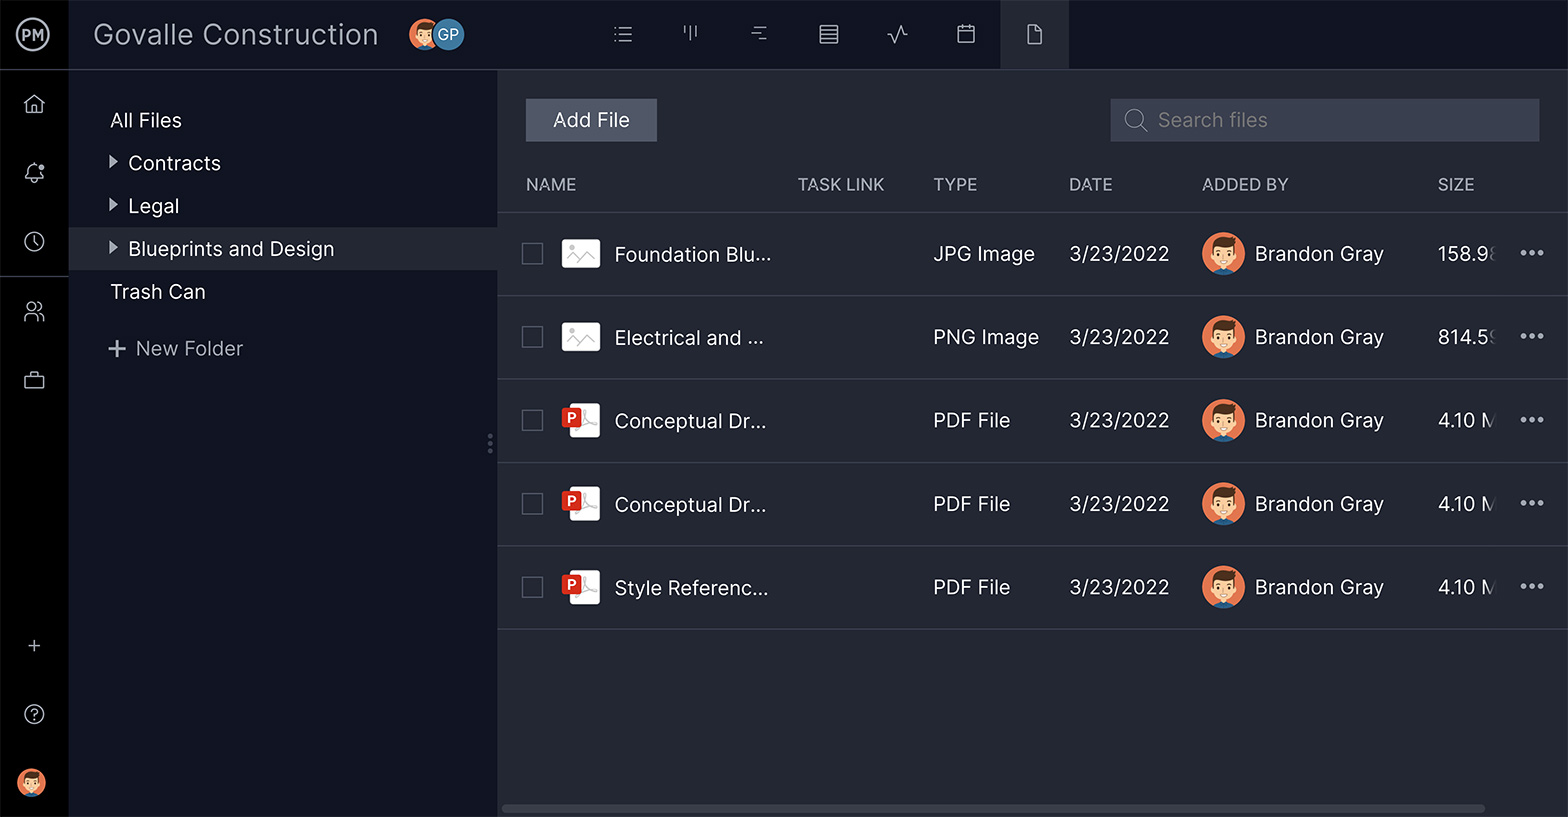 ProjectManager's task lists allow you to share files in real time